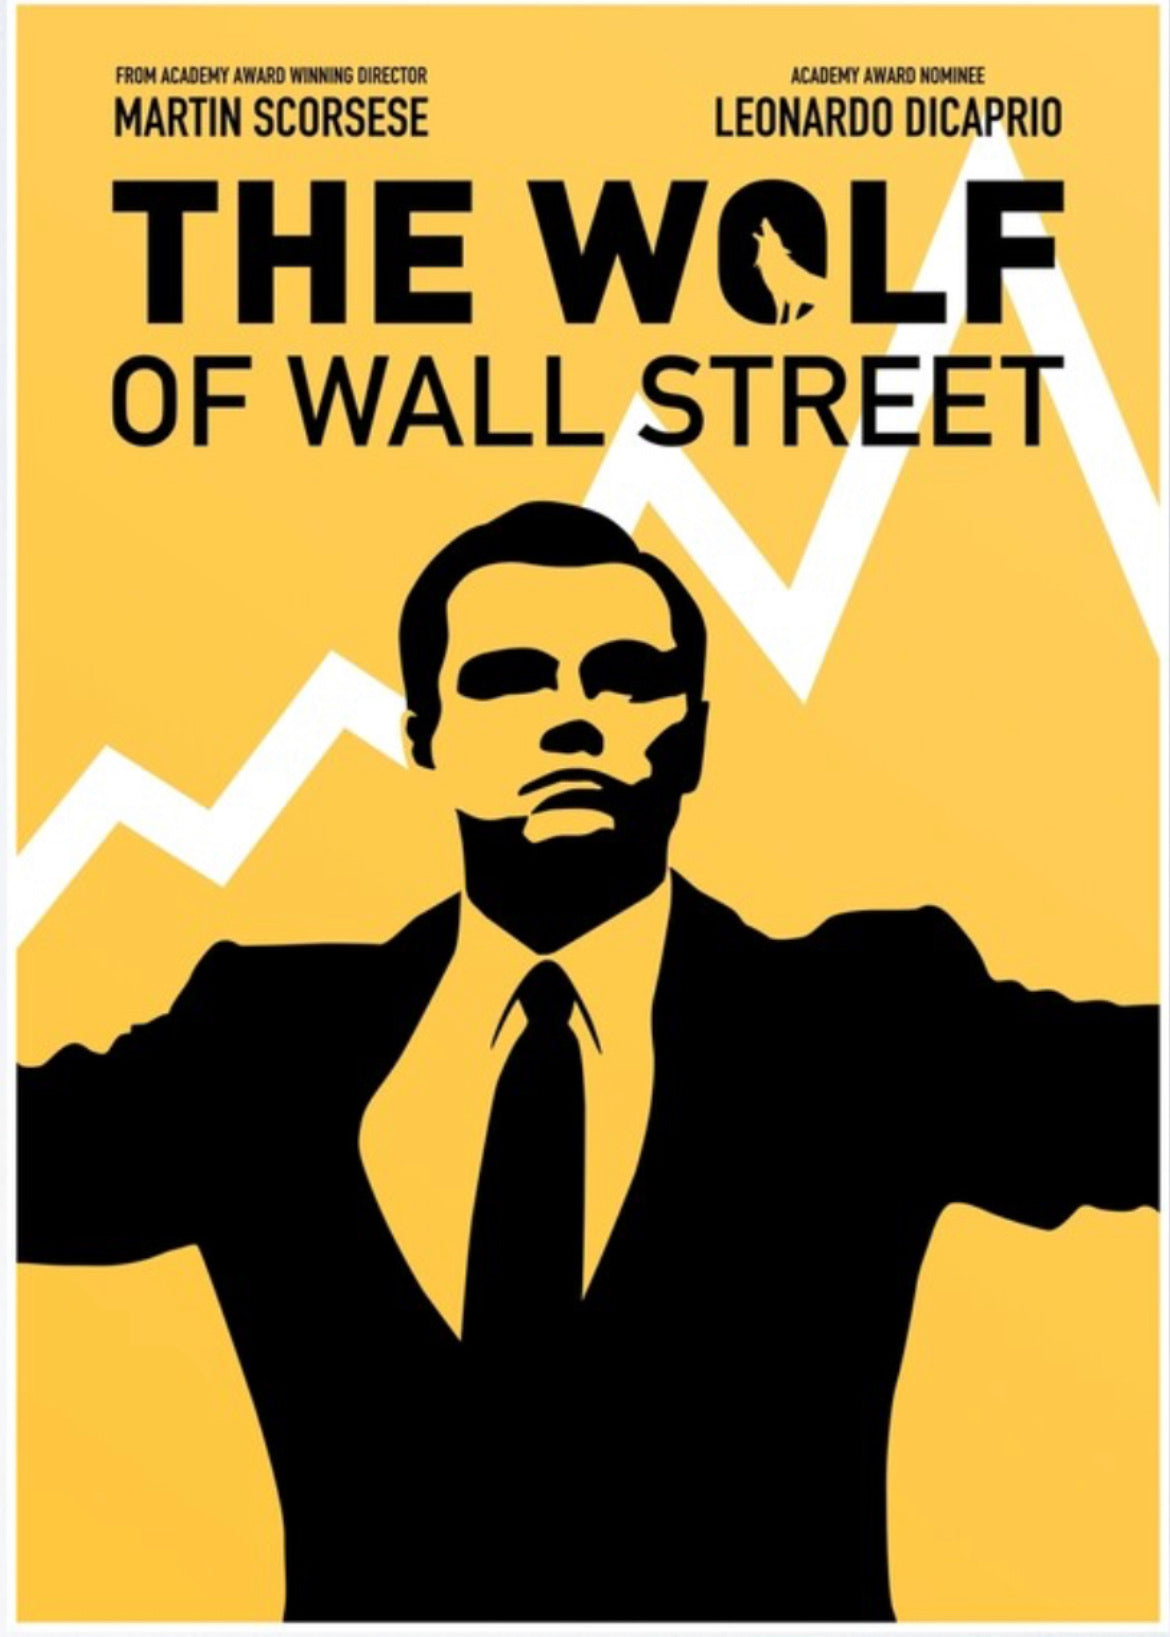 The Wolf of Wall Street (2013) iTunes HD redemption only